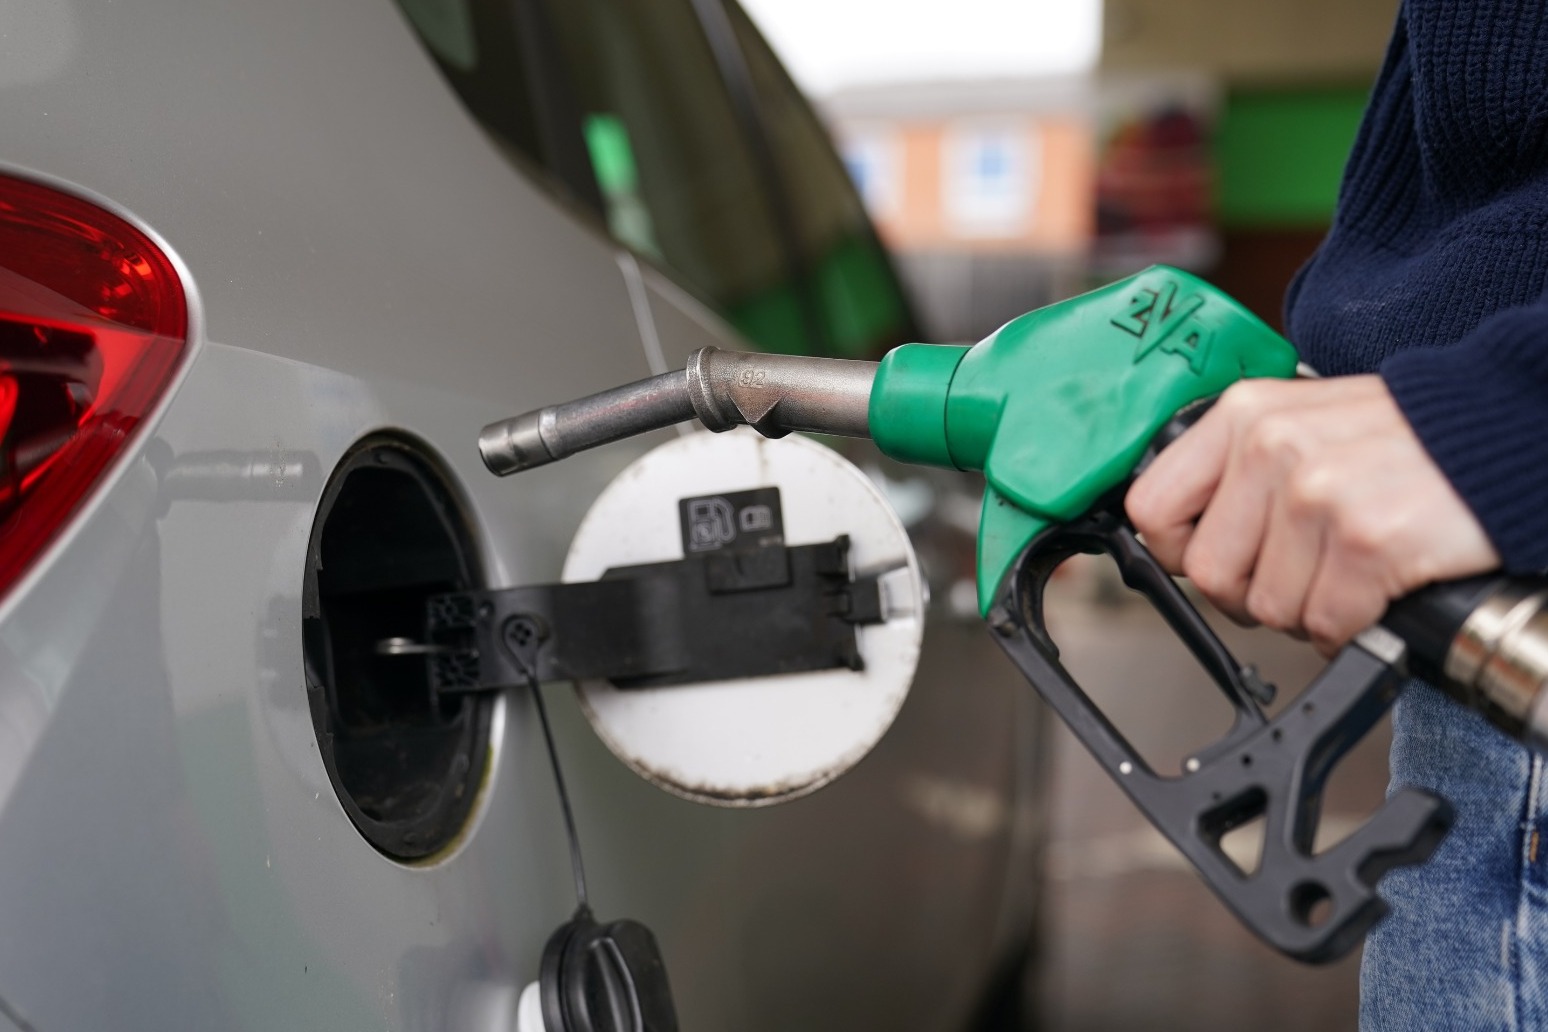 Average fuel price hits $5 a gallon in US 